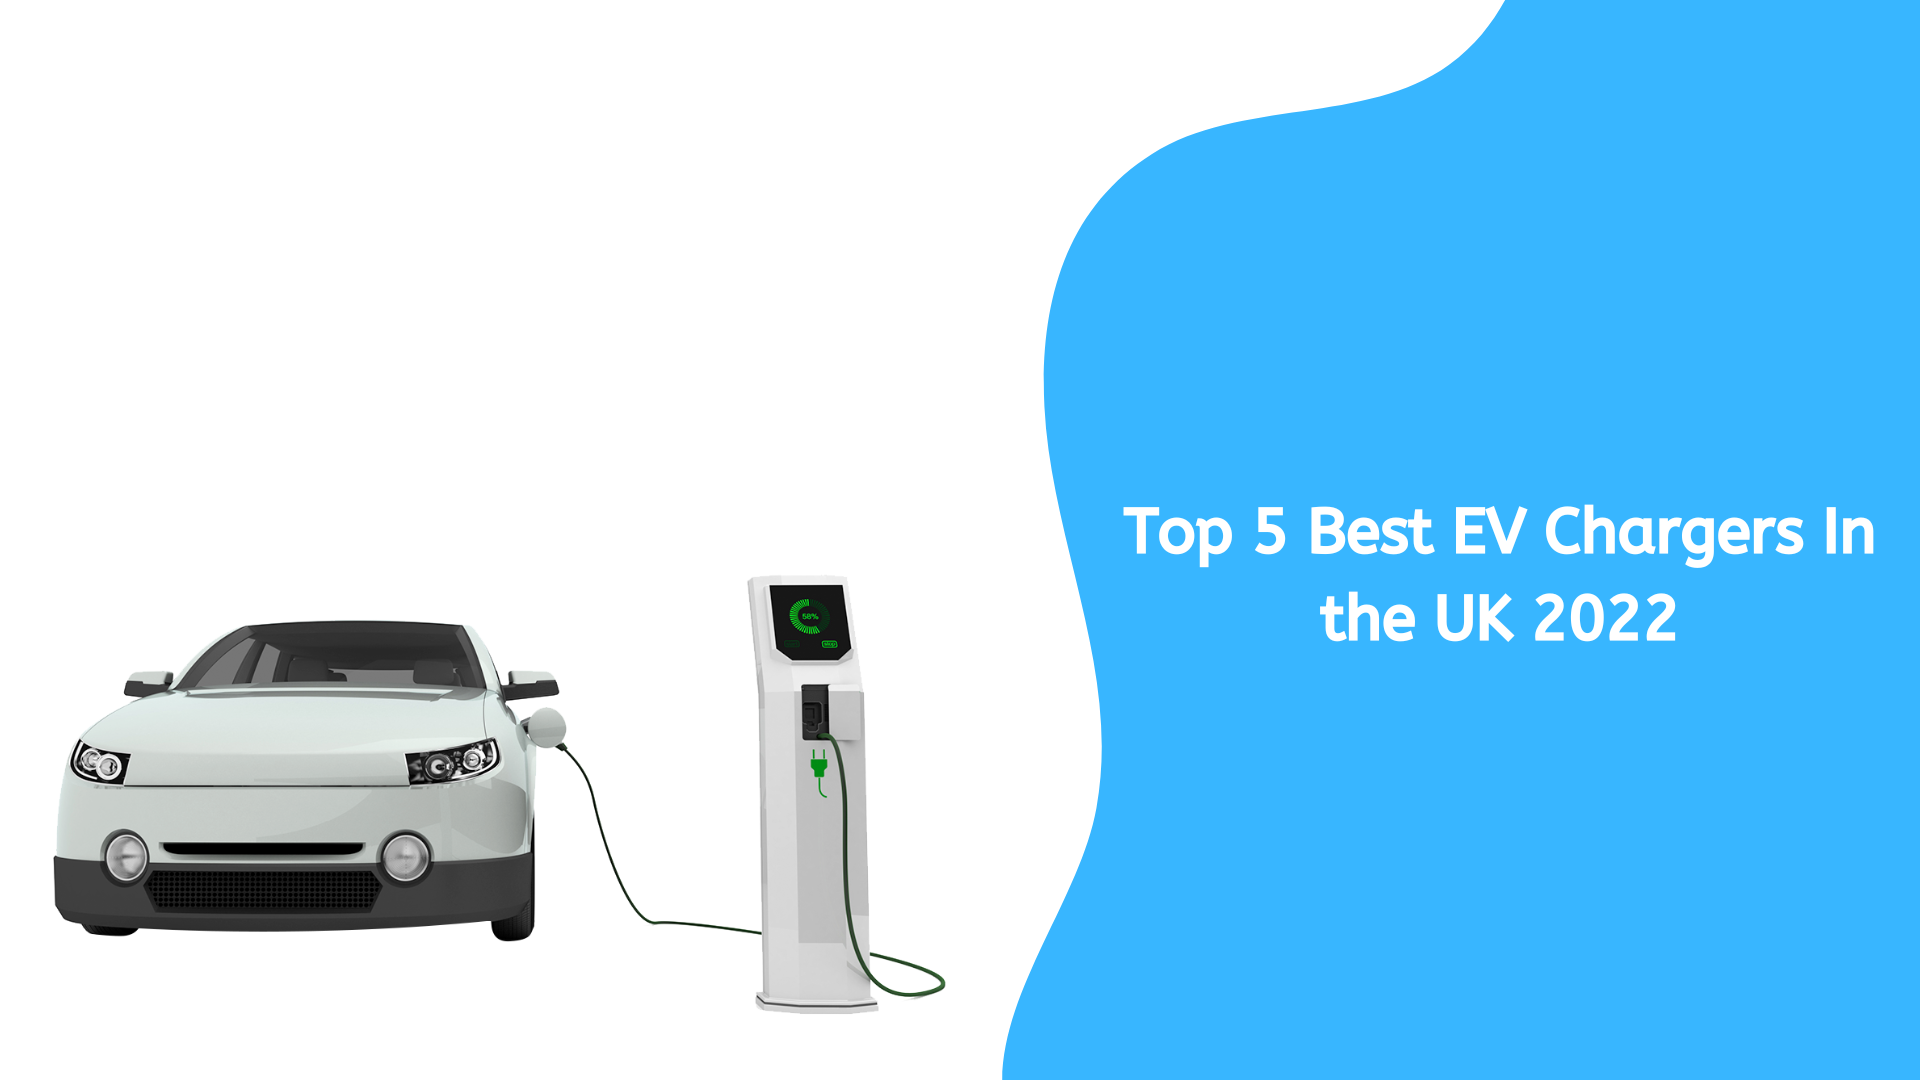 Best UK EV Chargers | Check Top 5 Best Home Electric Vehicle Chargers.